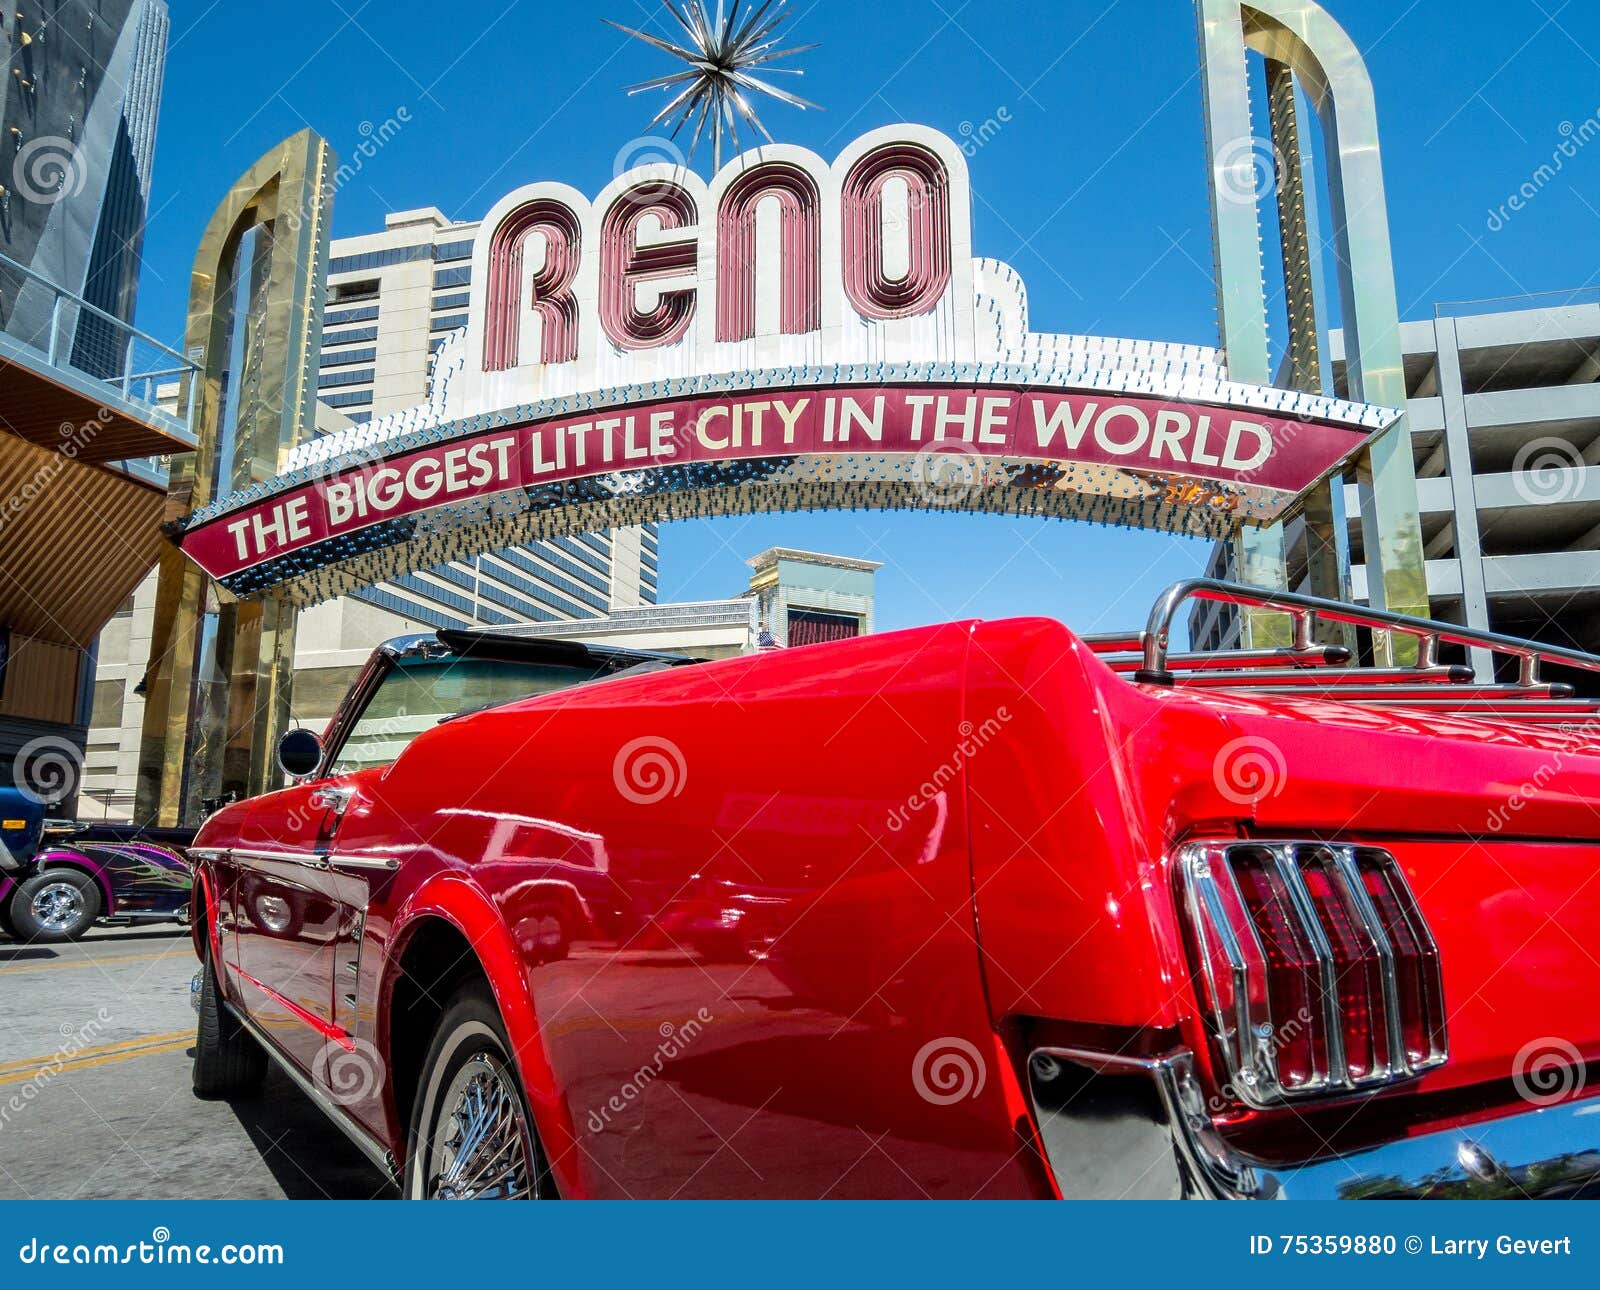 hot august nights event, downtown reno, nevada